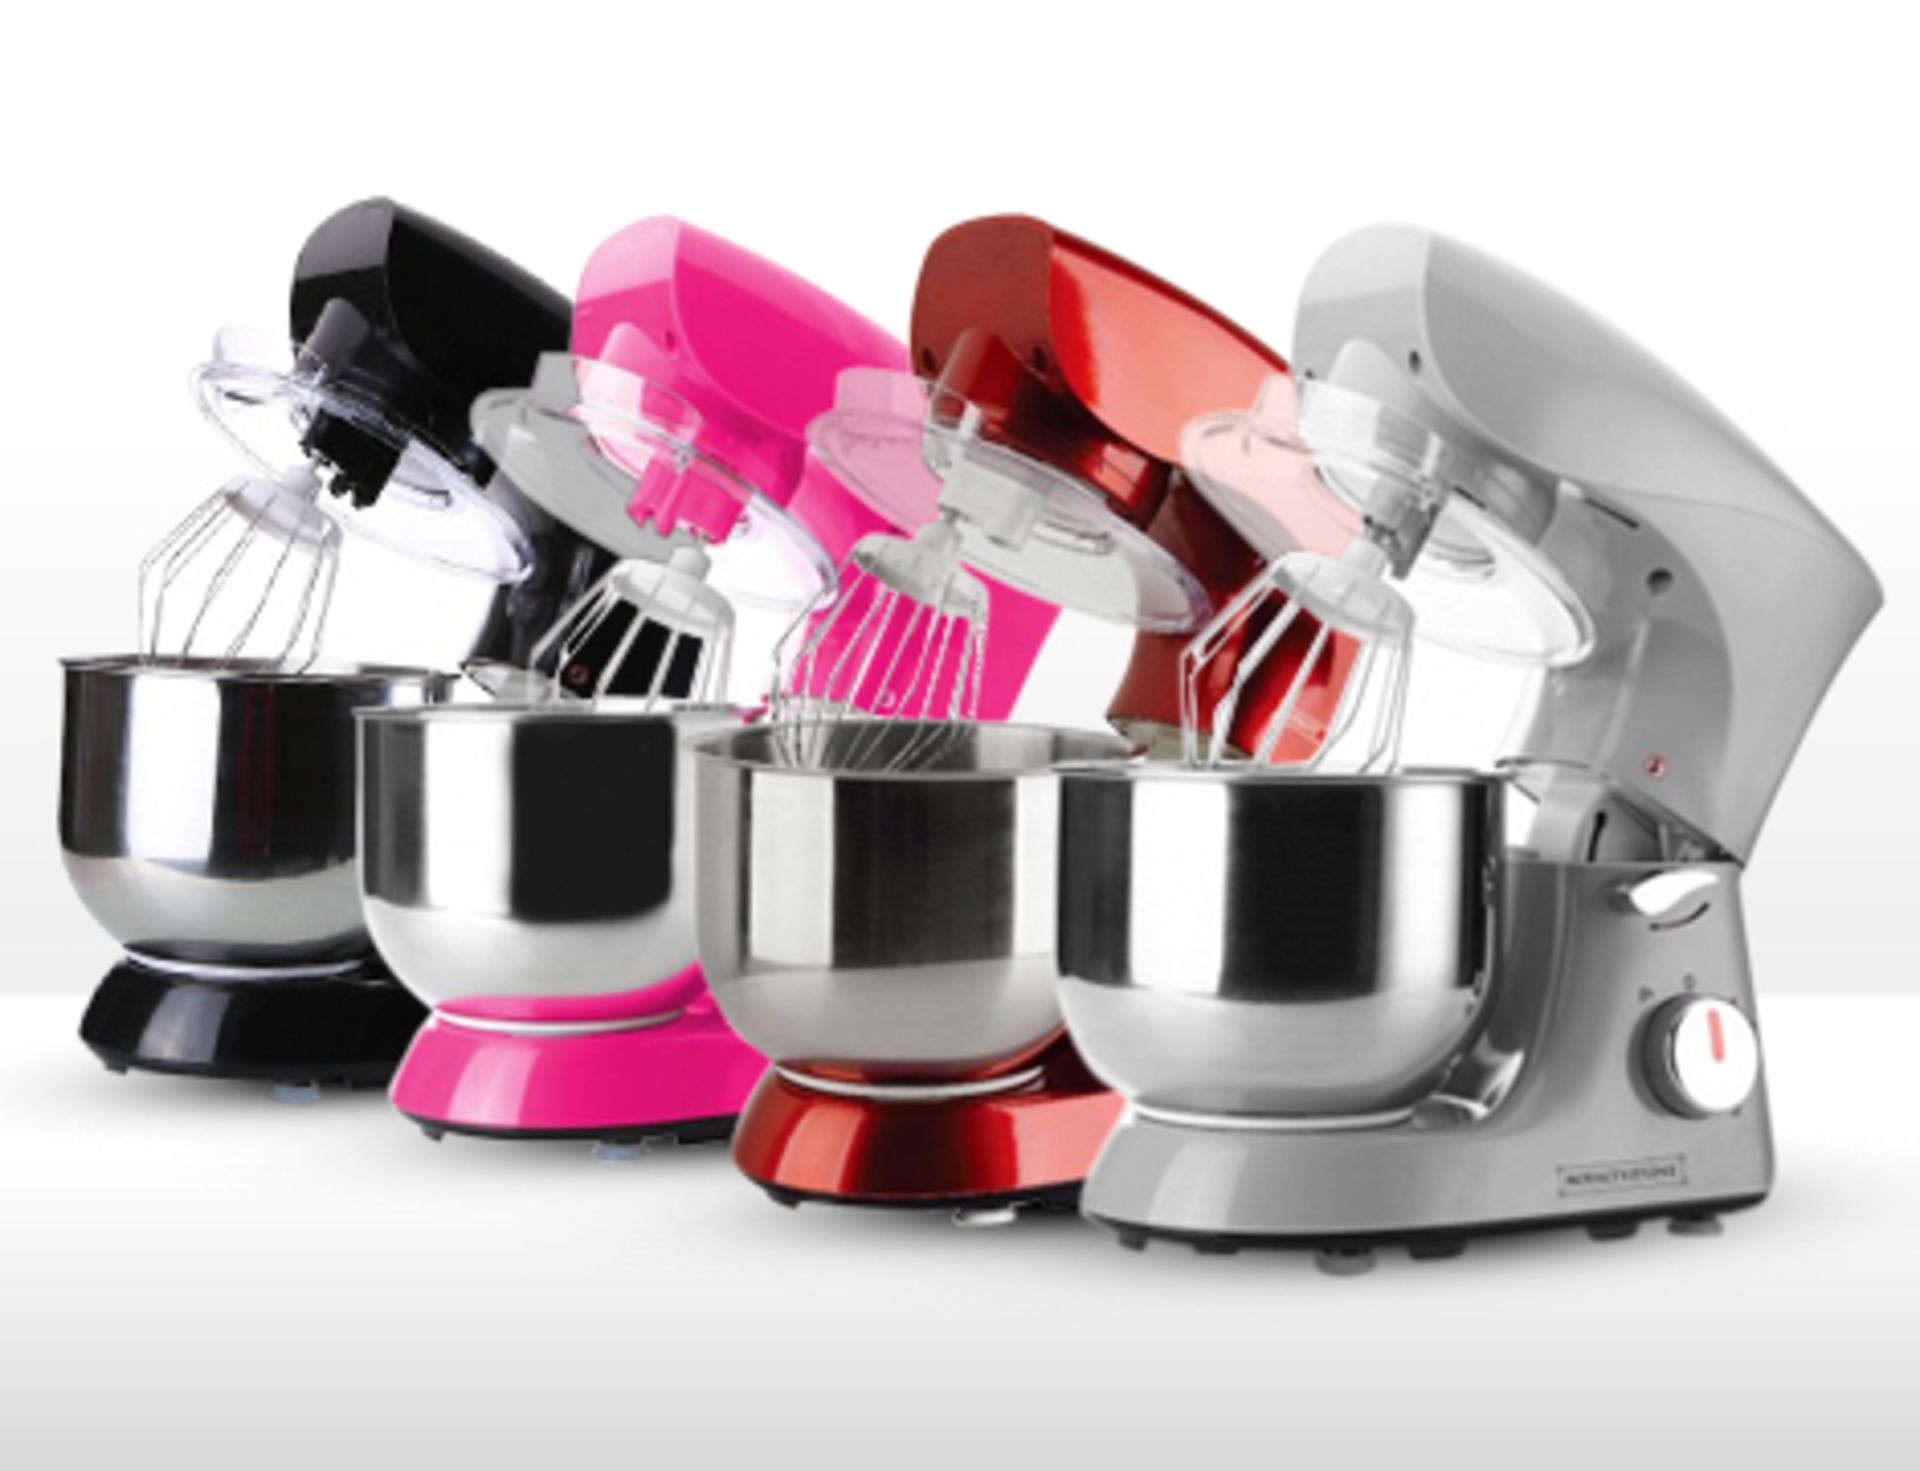 V Brand New 1400w Stand Mixer - 5 Speed With Pulse Function - Stainless Steel Mixing Bowl - Dough